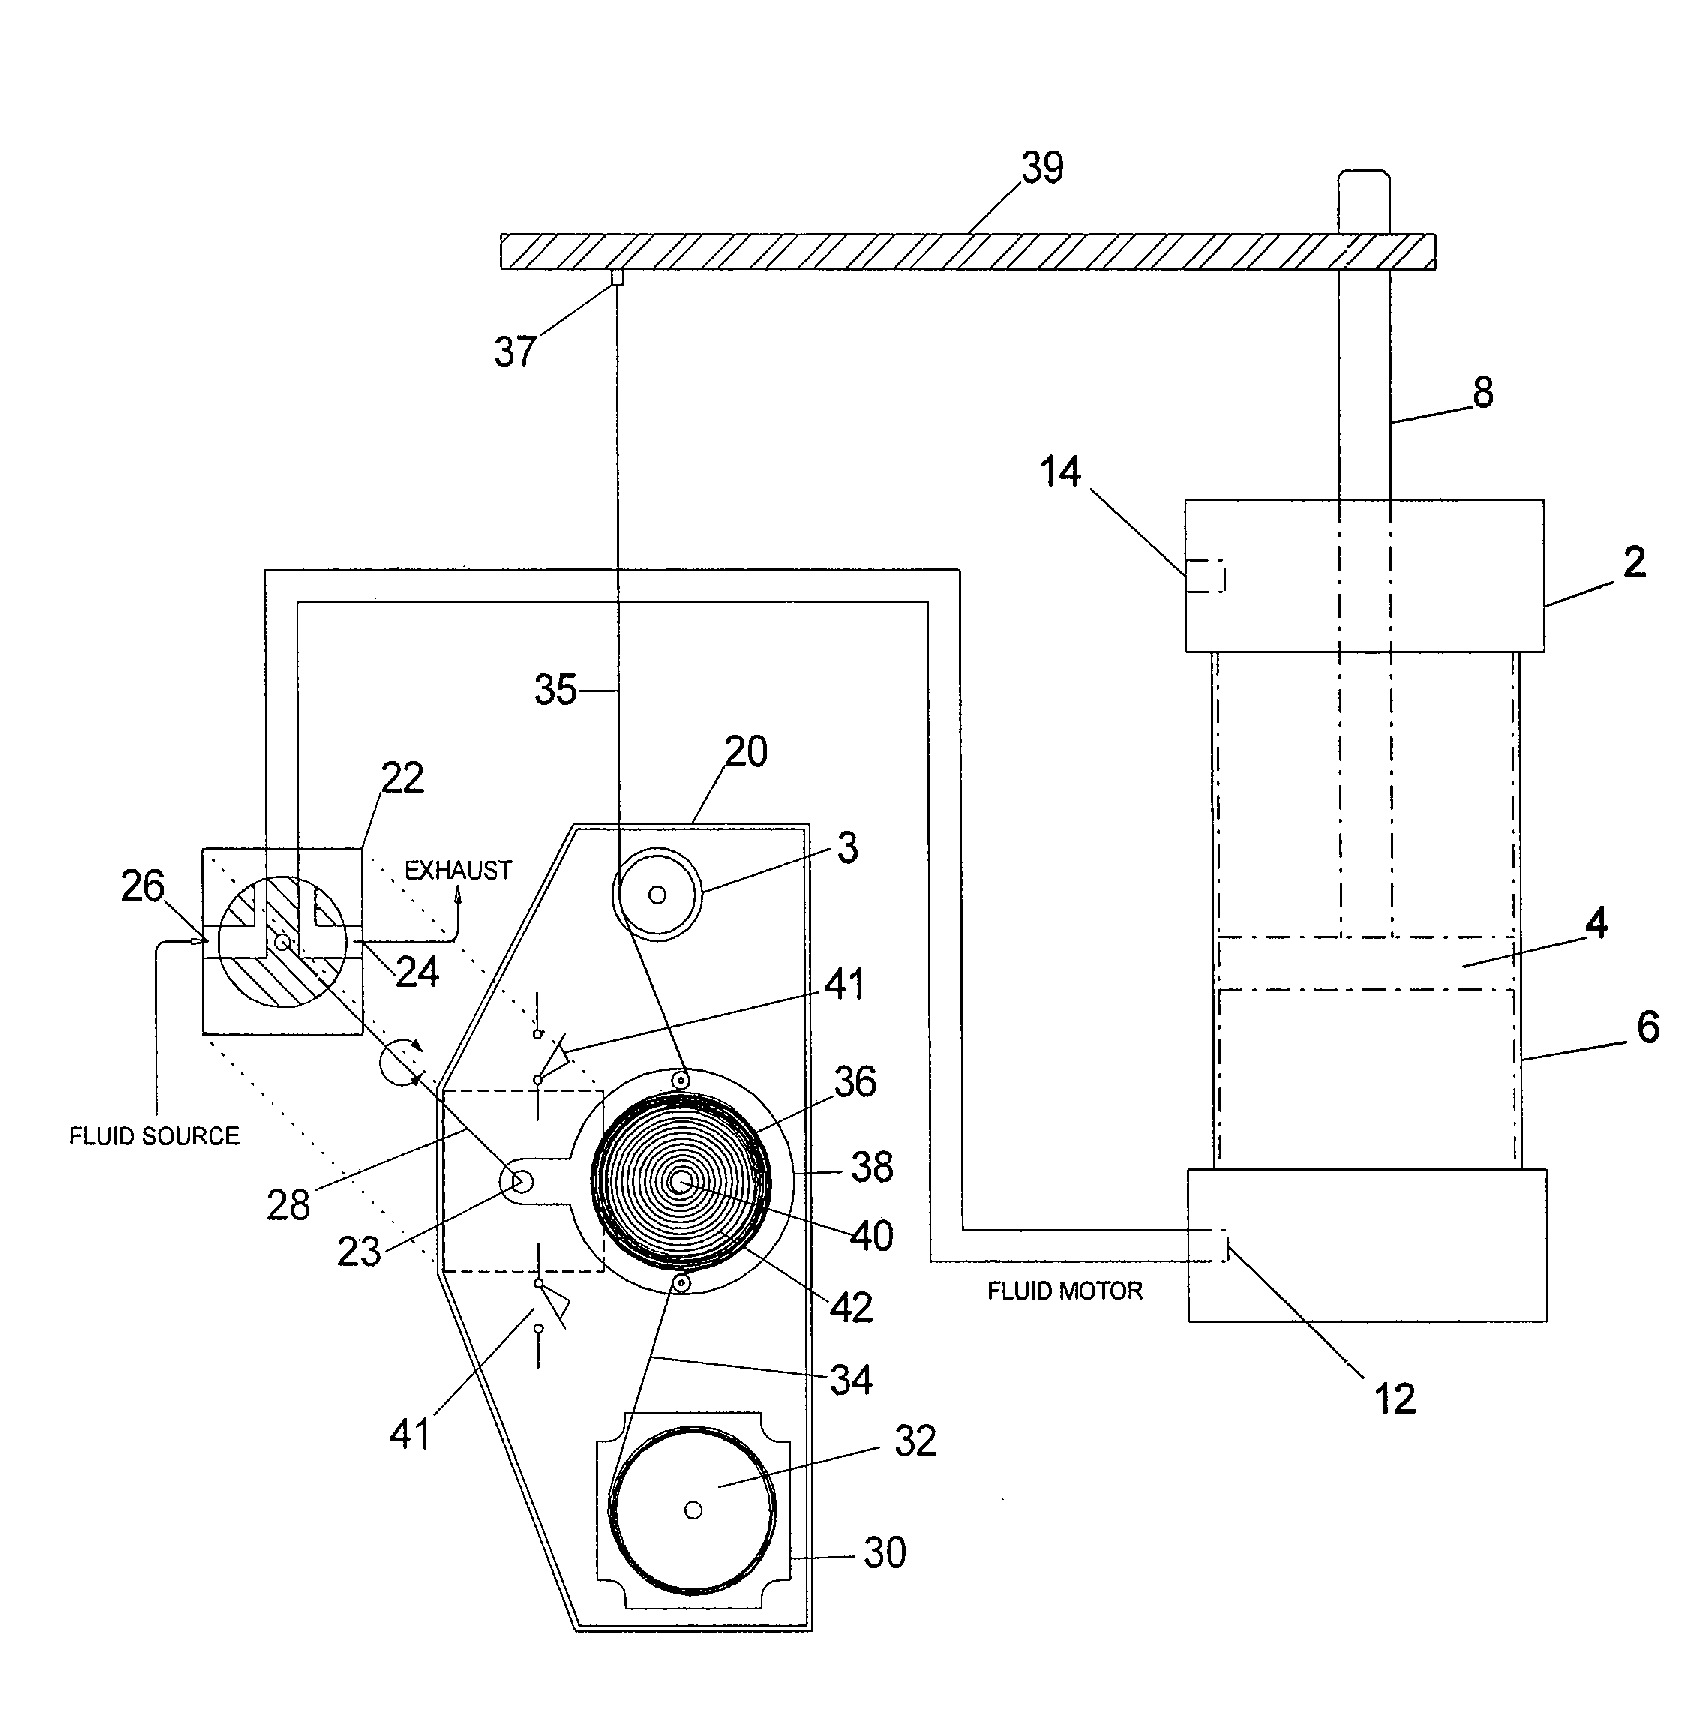 Electro-mechanical control system for positioning fluid motors